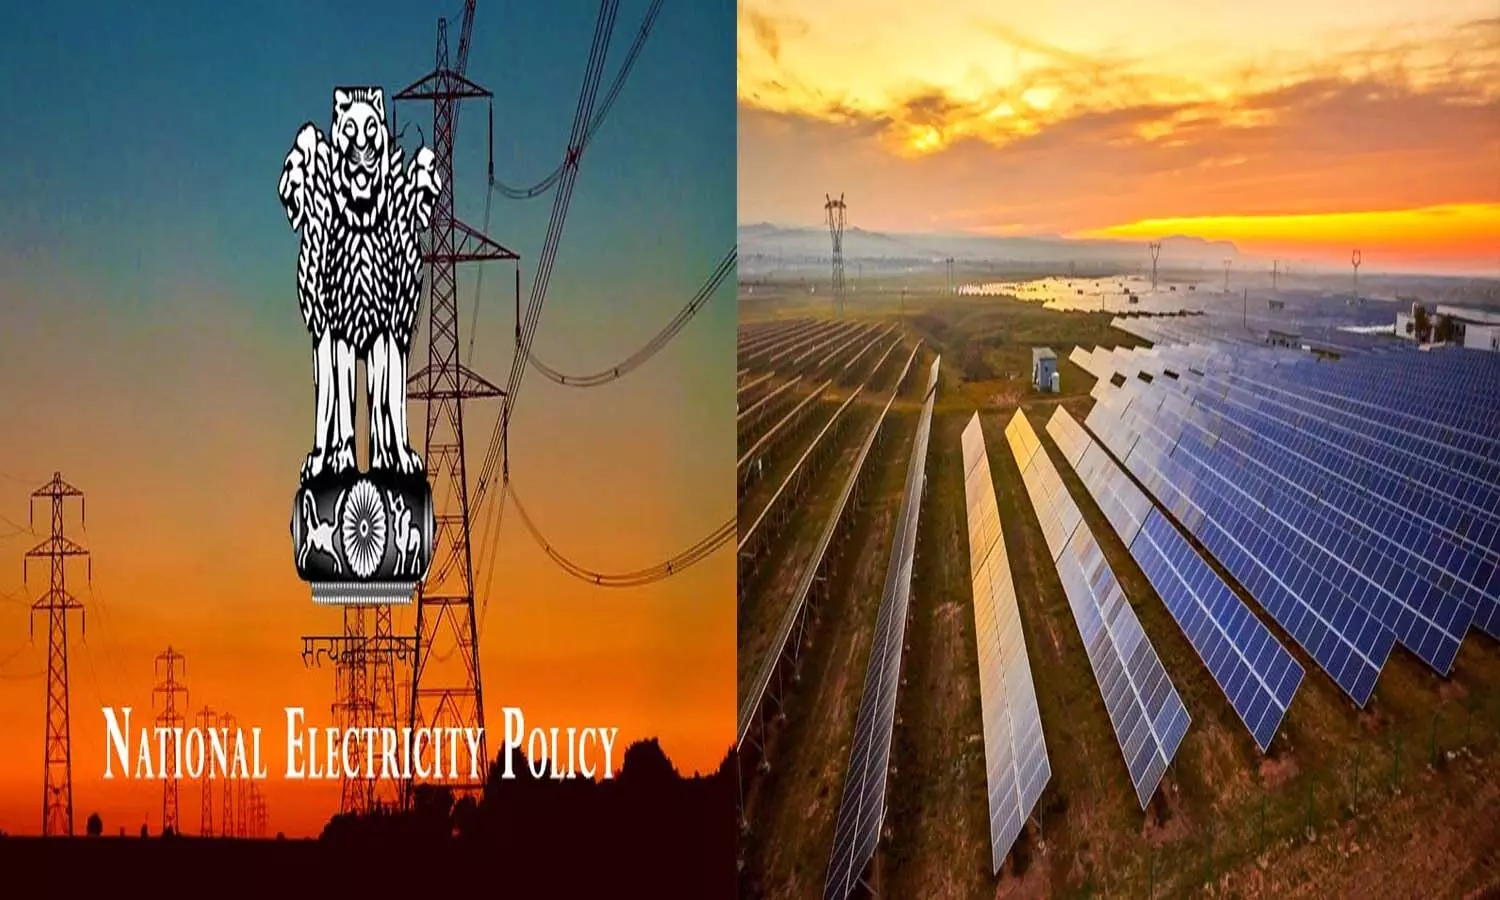 Policy makers focus on solar in National Electricity Policy, double digit increase in solar power capacity